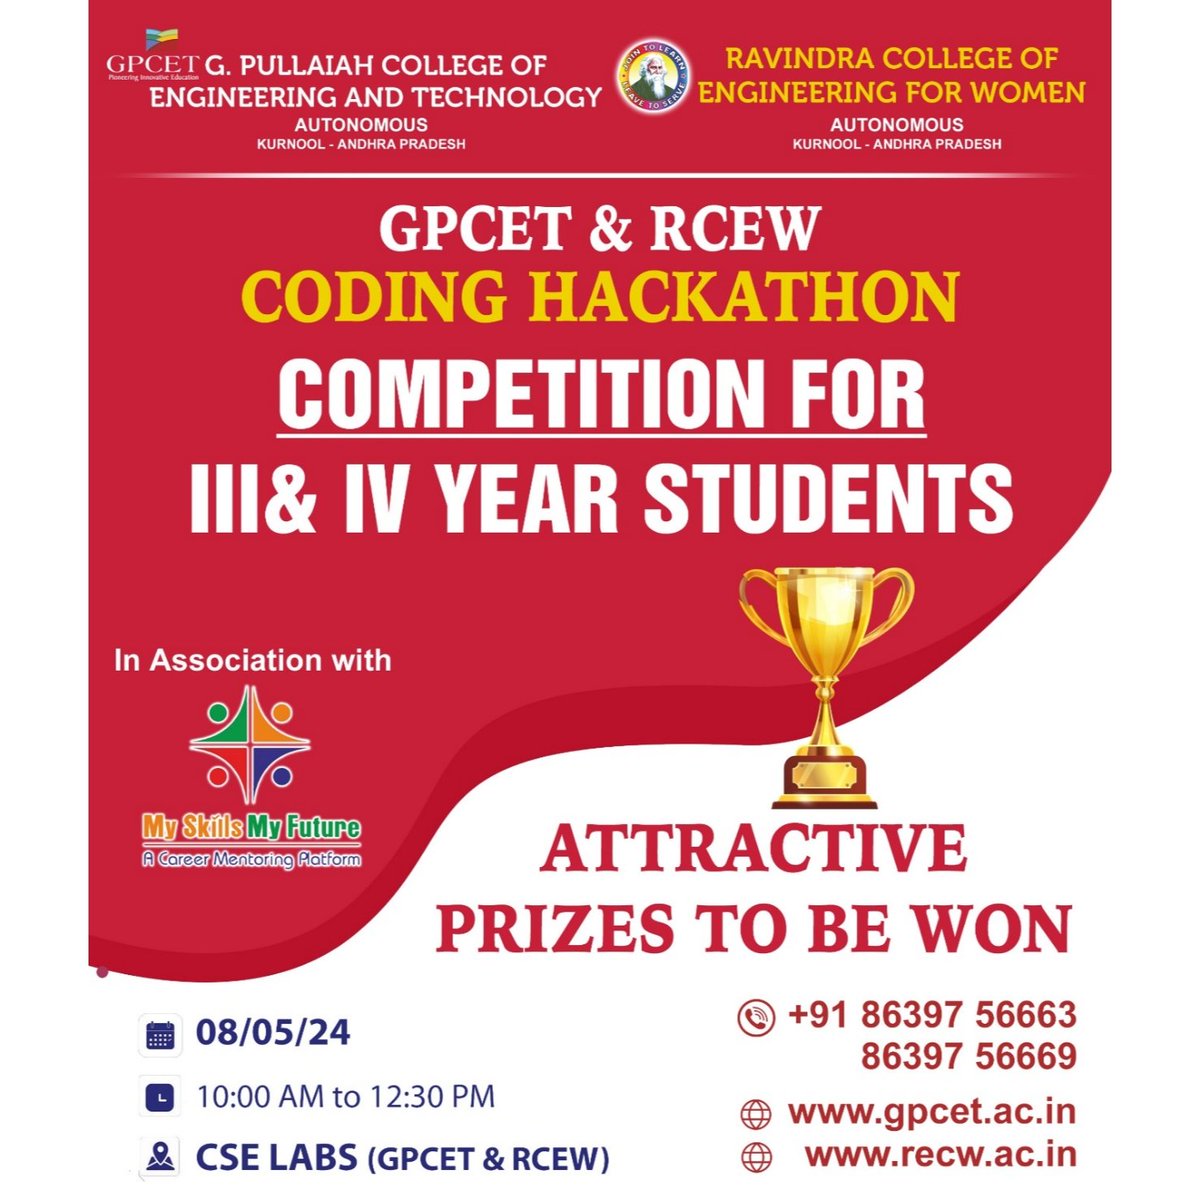 Gear up Students! Prove your talent and bag attractive prizes in Coding Hackathon organized by GPCET and RCEW. Let's see who will be the winners of CODING HACKATHON-MAY 2024.
ALL THE BEST.
@gpcetofficial
#gpcetofficial #coding #program #coder #programminghelp